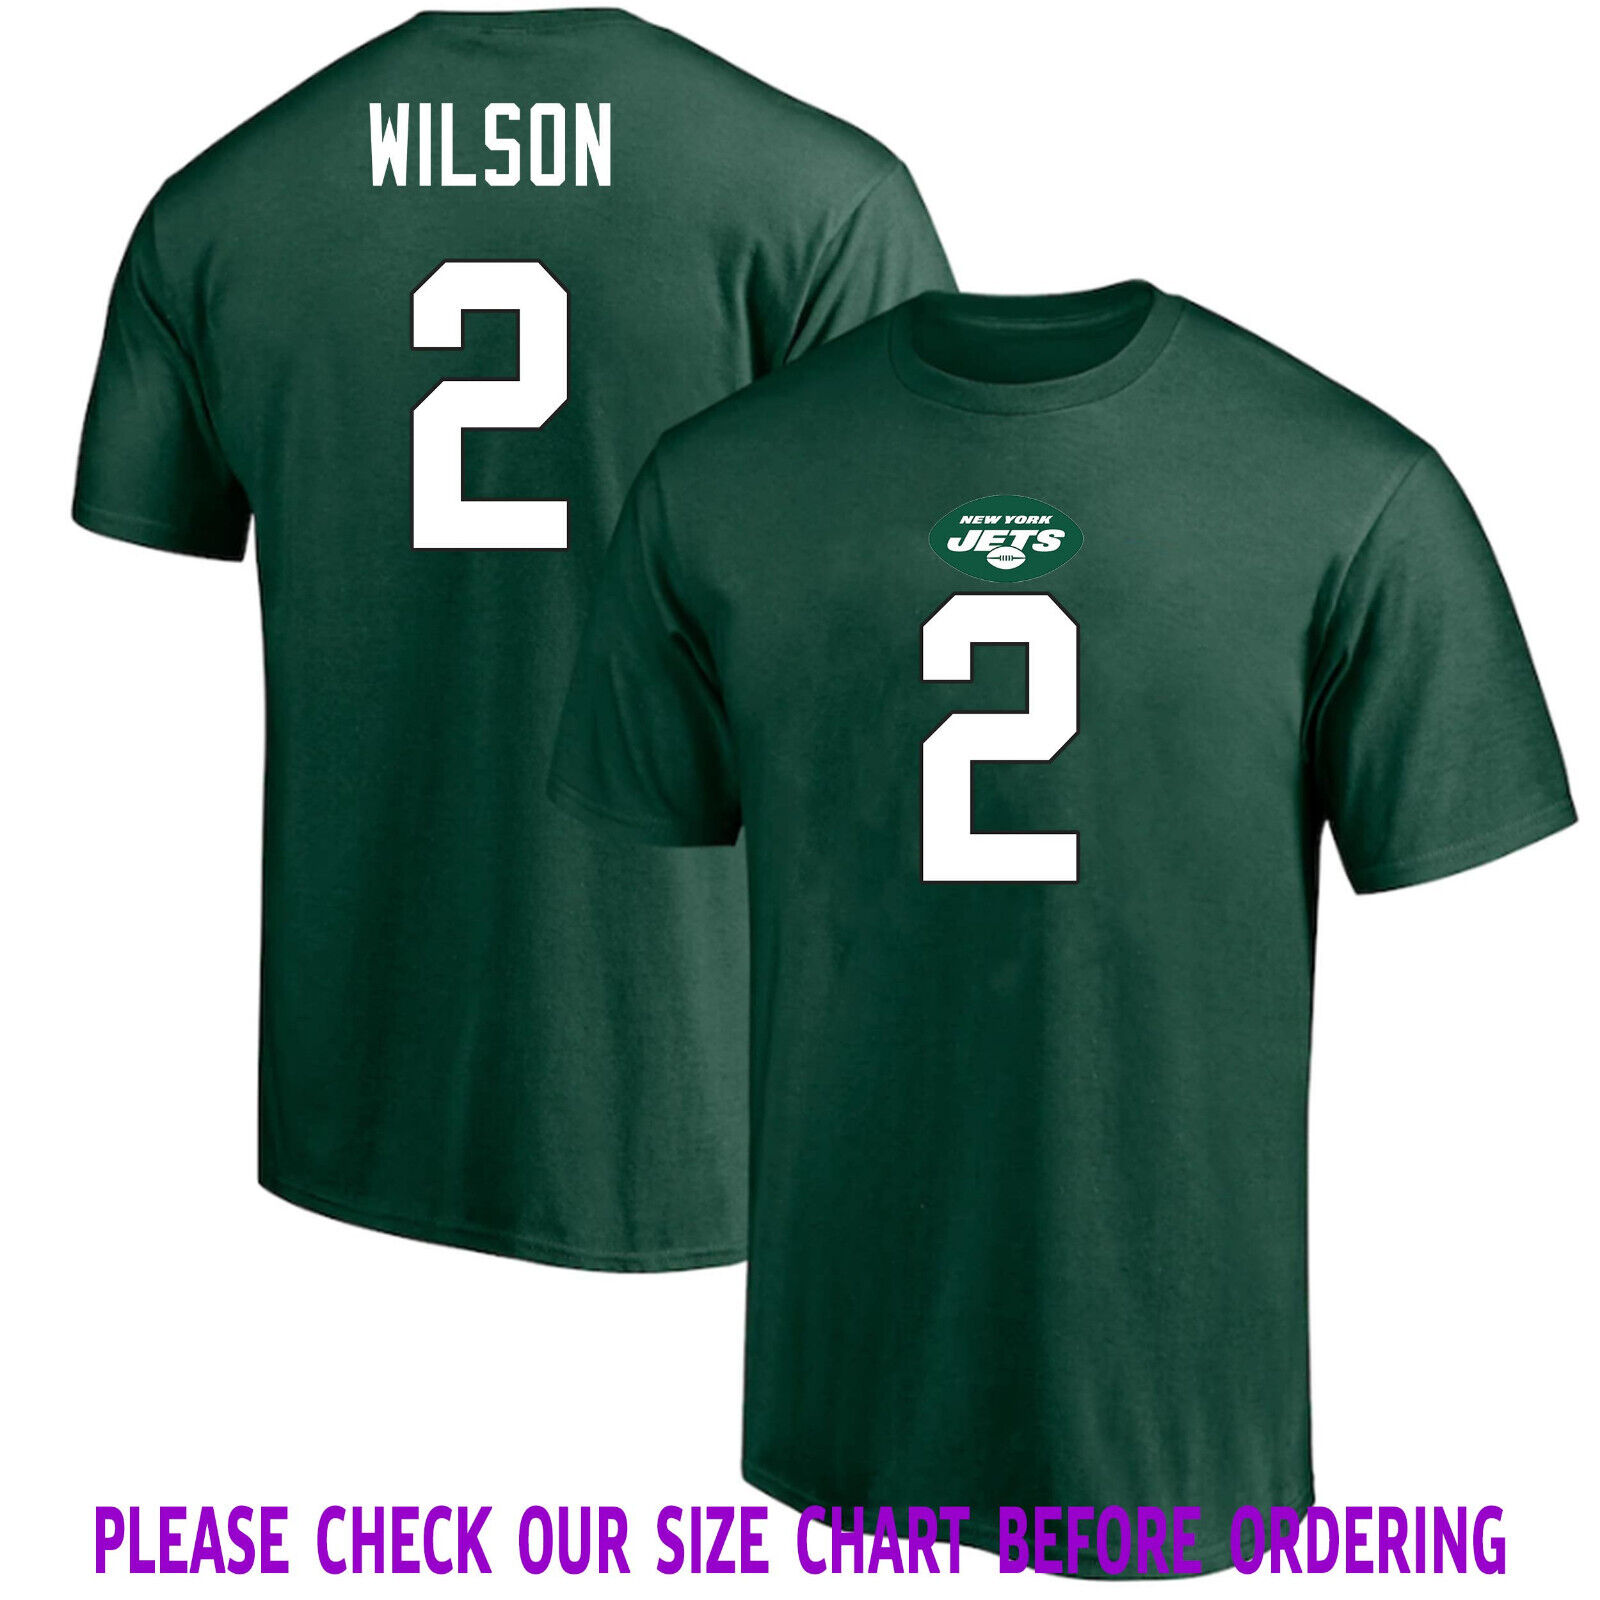 SALE 30% – Zach Wilson 0#2 New York Jets Player Name & Number T-Shirt